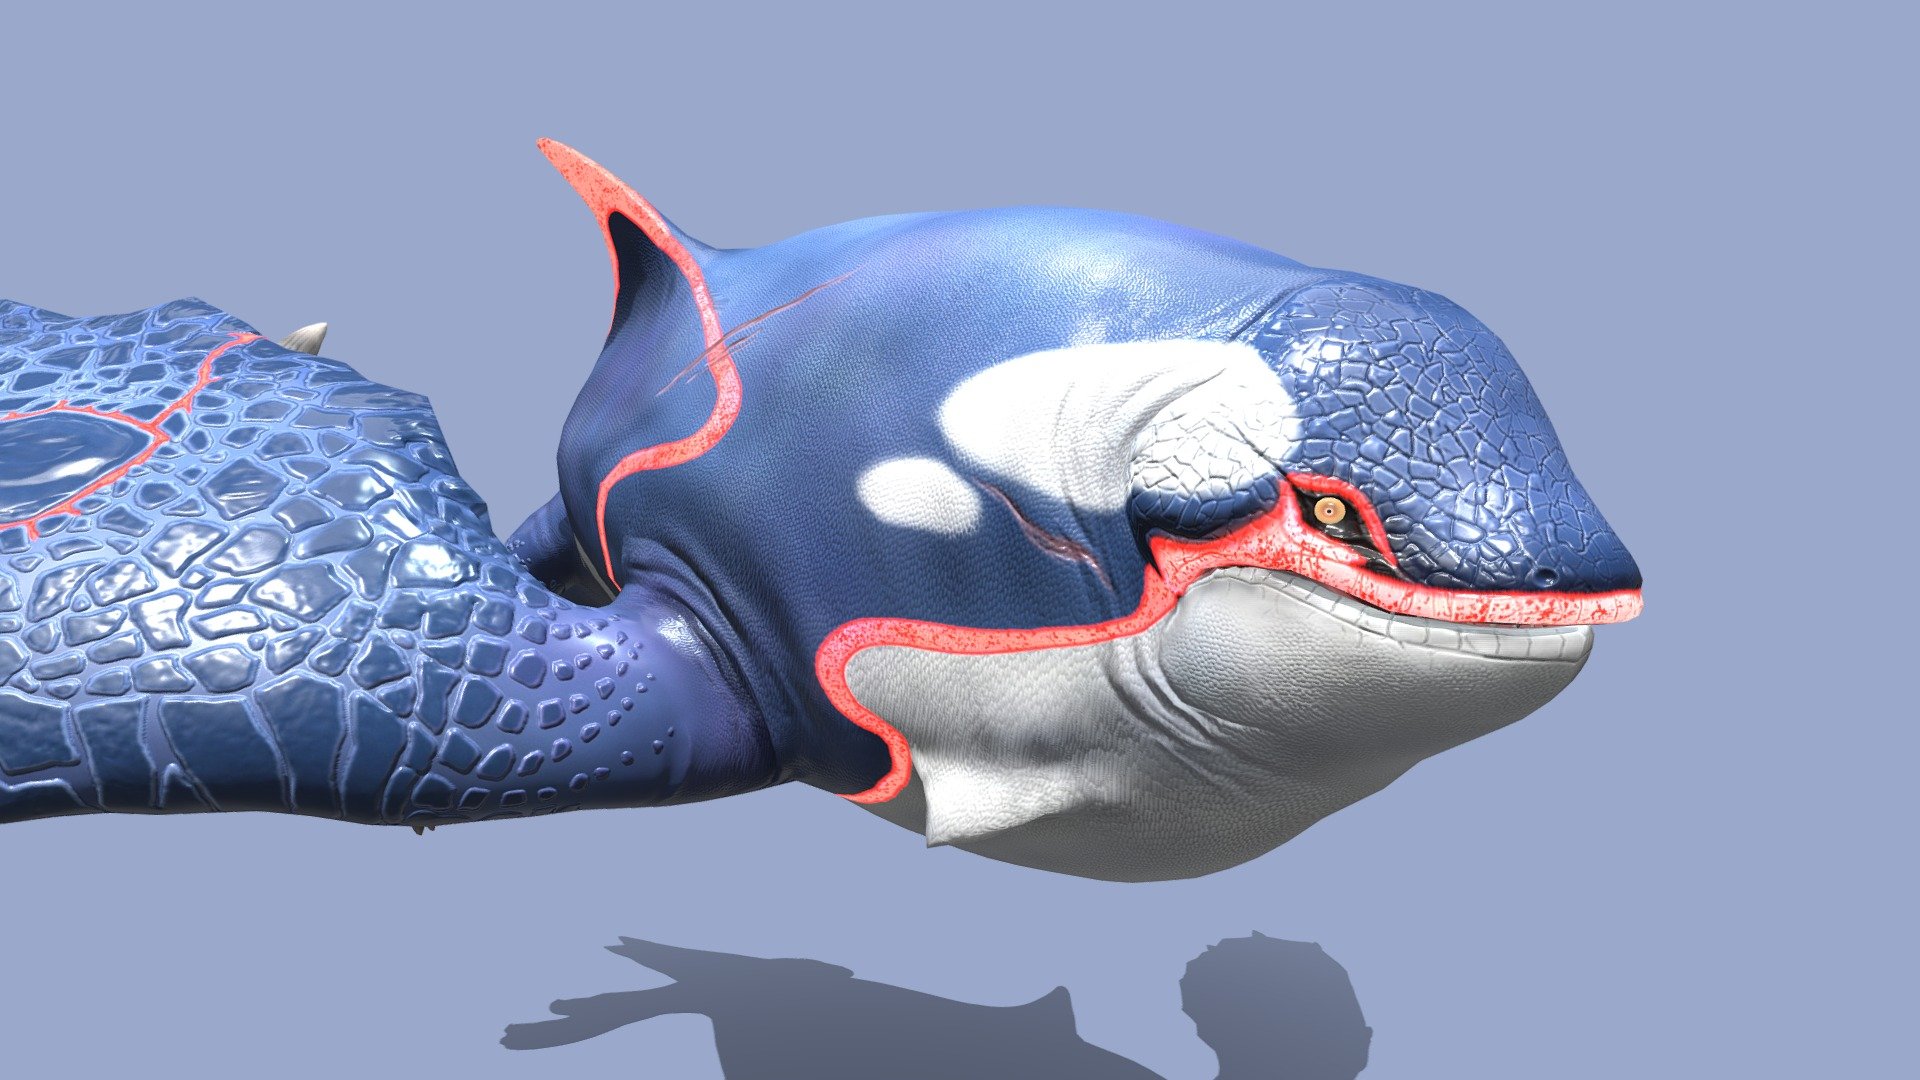 kyogre realistic